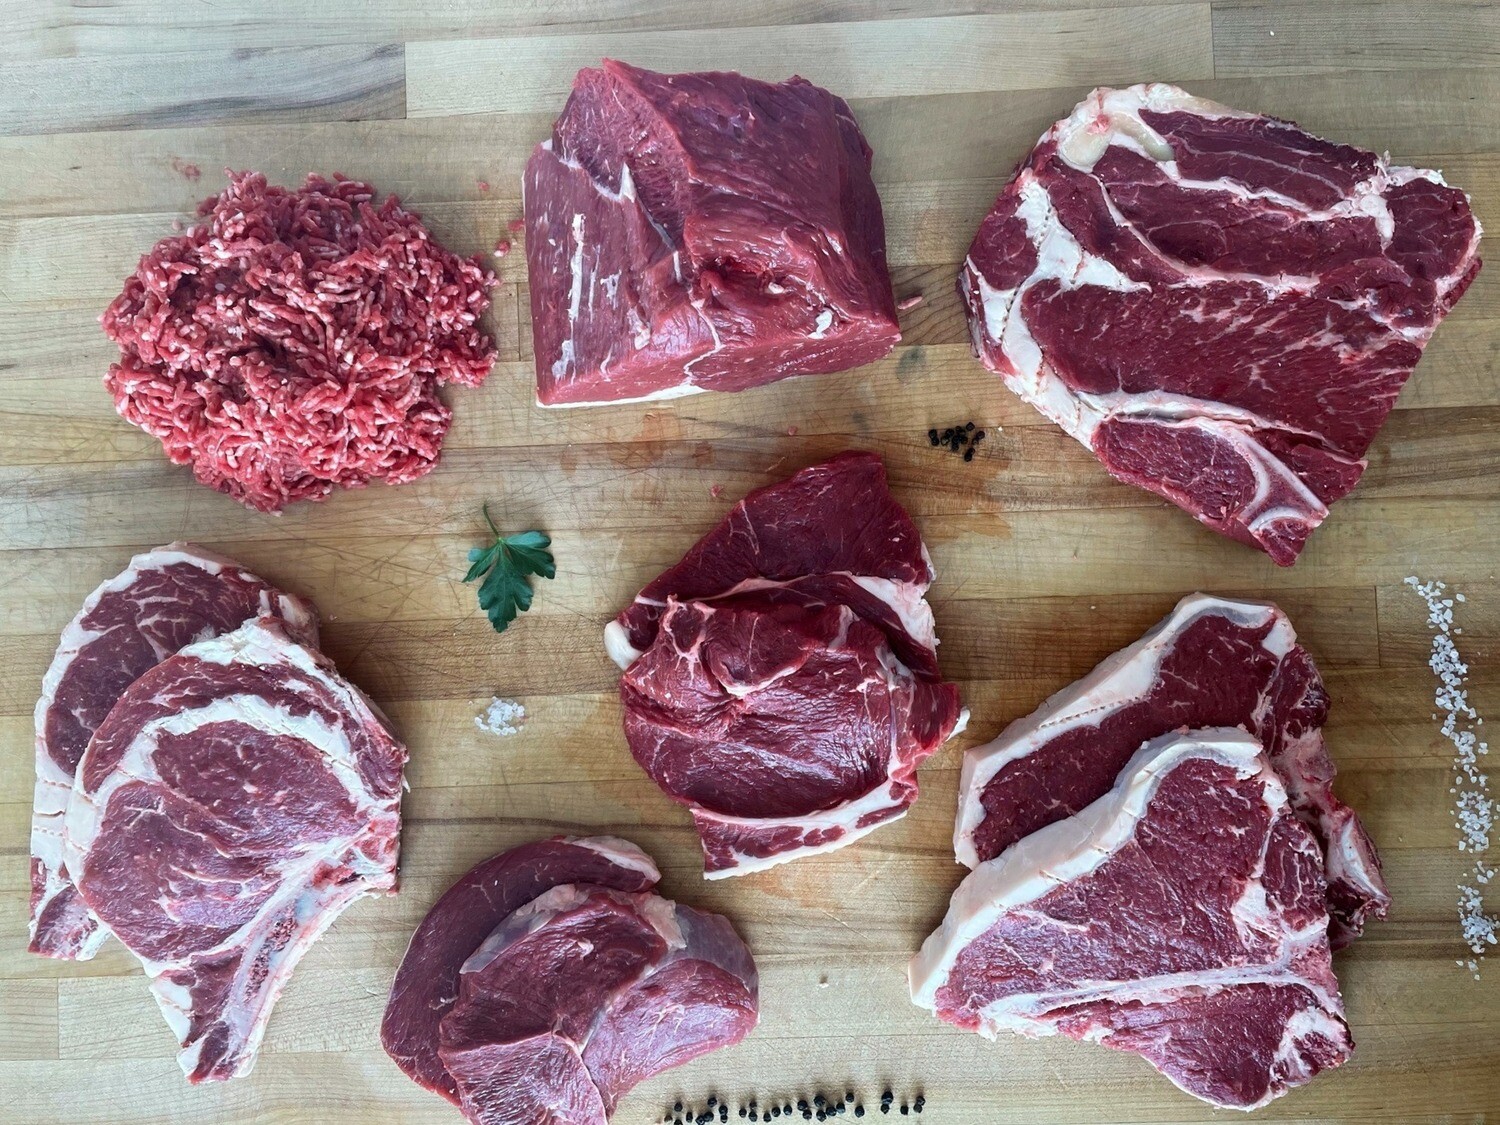 Beef Combo Box - Approx. $290-$300